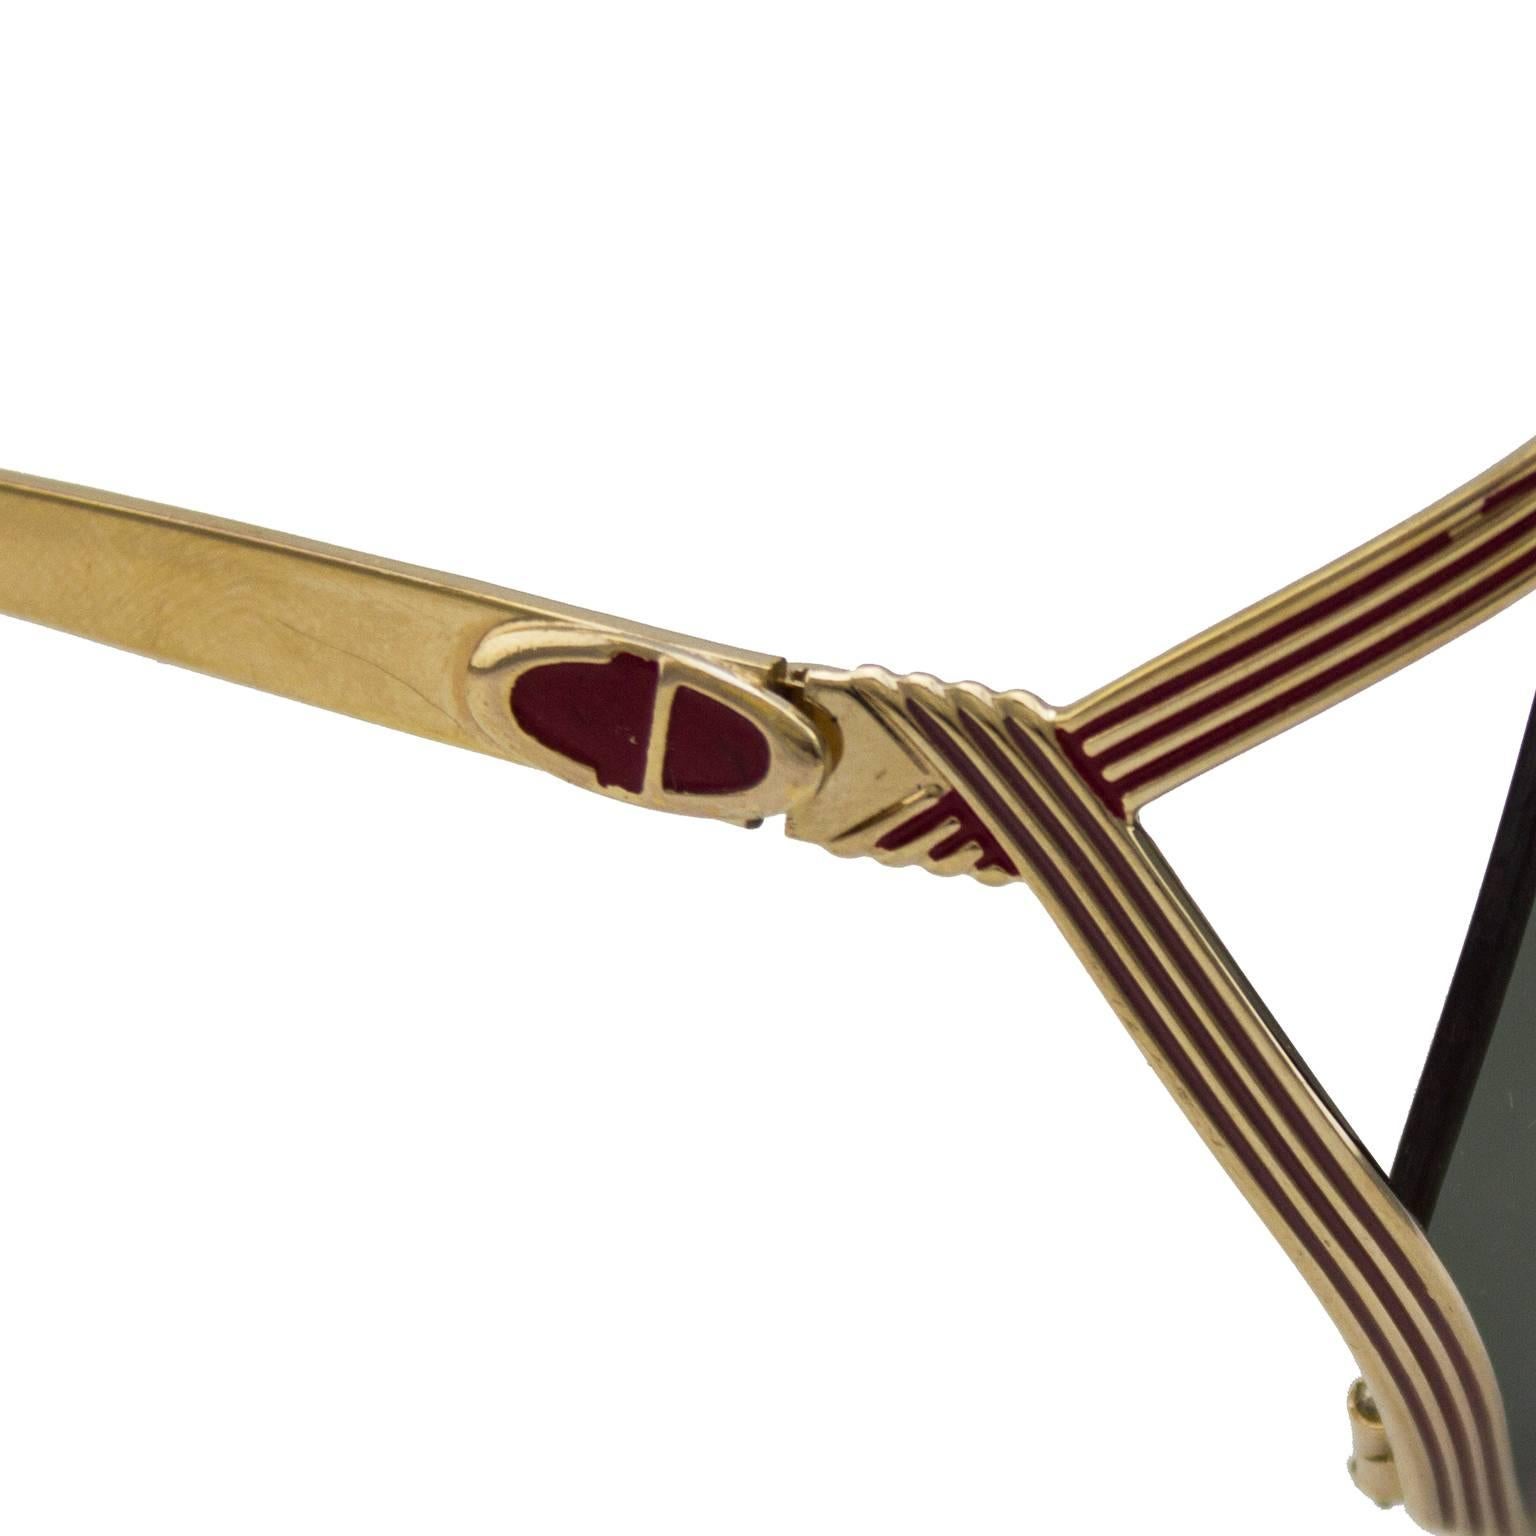 1980s Christian Dior gold metal sunglasses with red details throughout. CD logo on both arms and brand engraving on interior arm. New dark grey lenses. Excellent vintage condition. No box or case. 